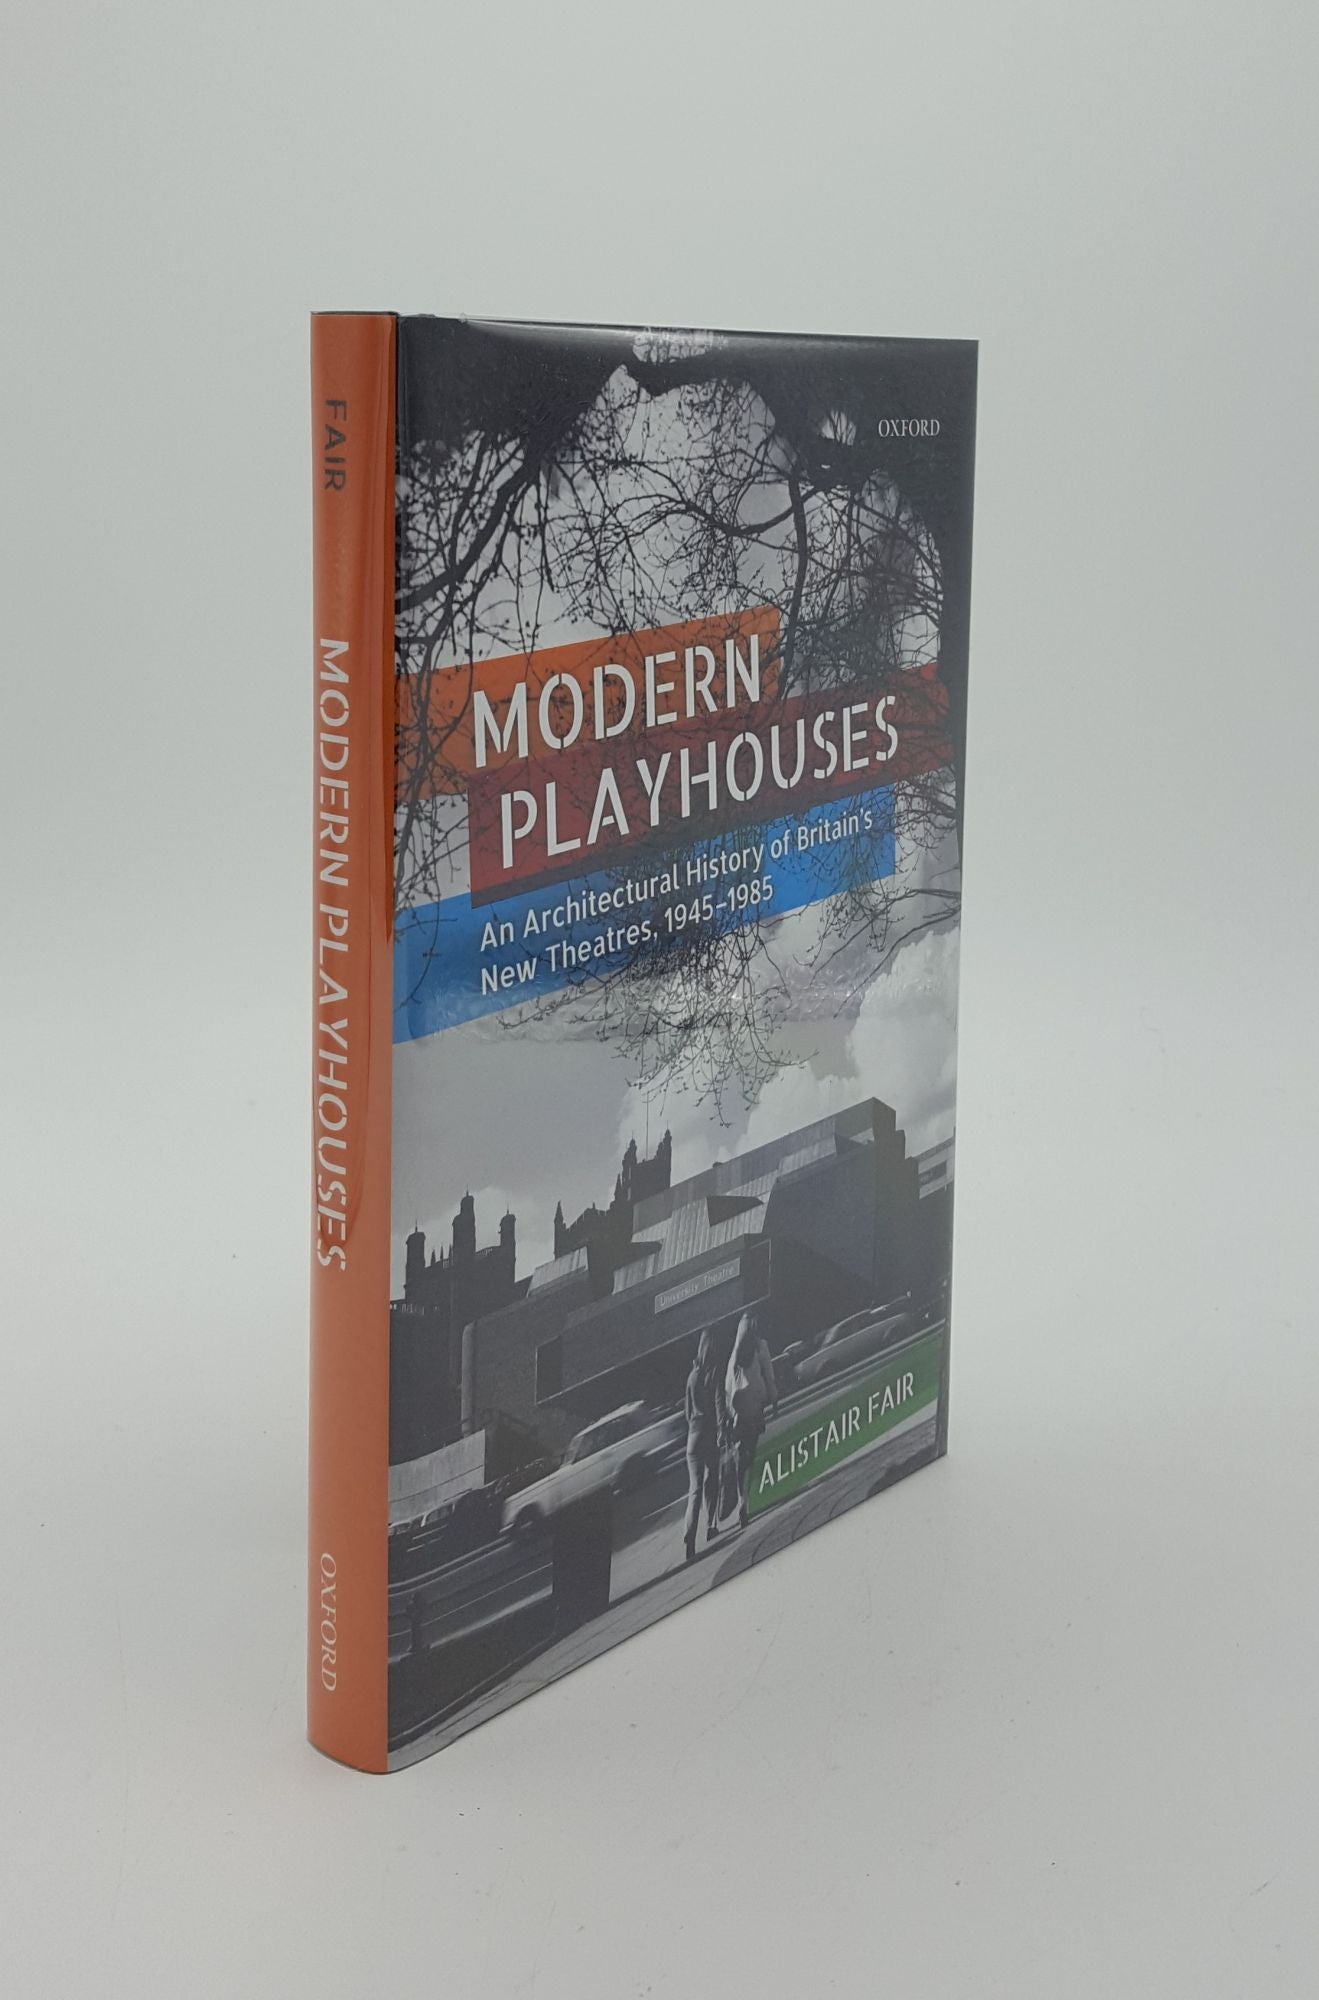 FAIR Alistair - Modern Playhouses an Architectural History of Britain's New Theatres 1945-1985